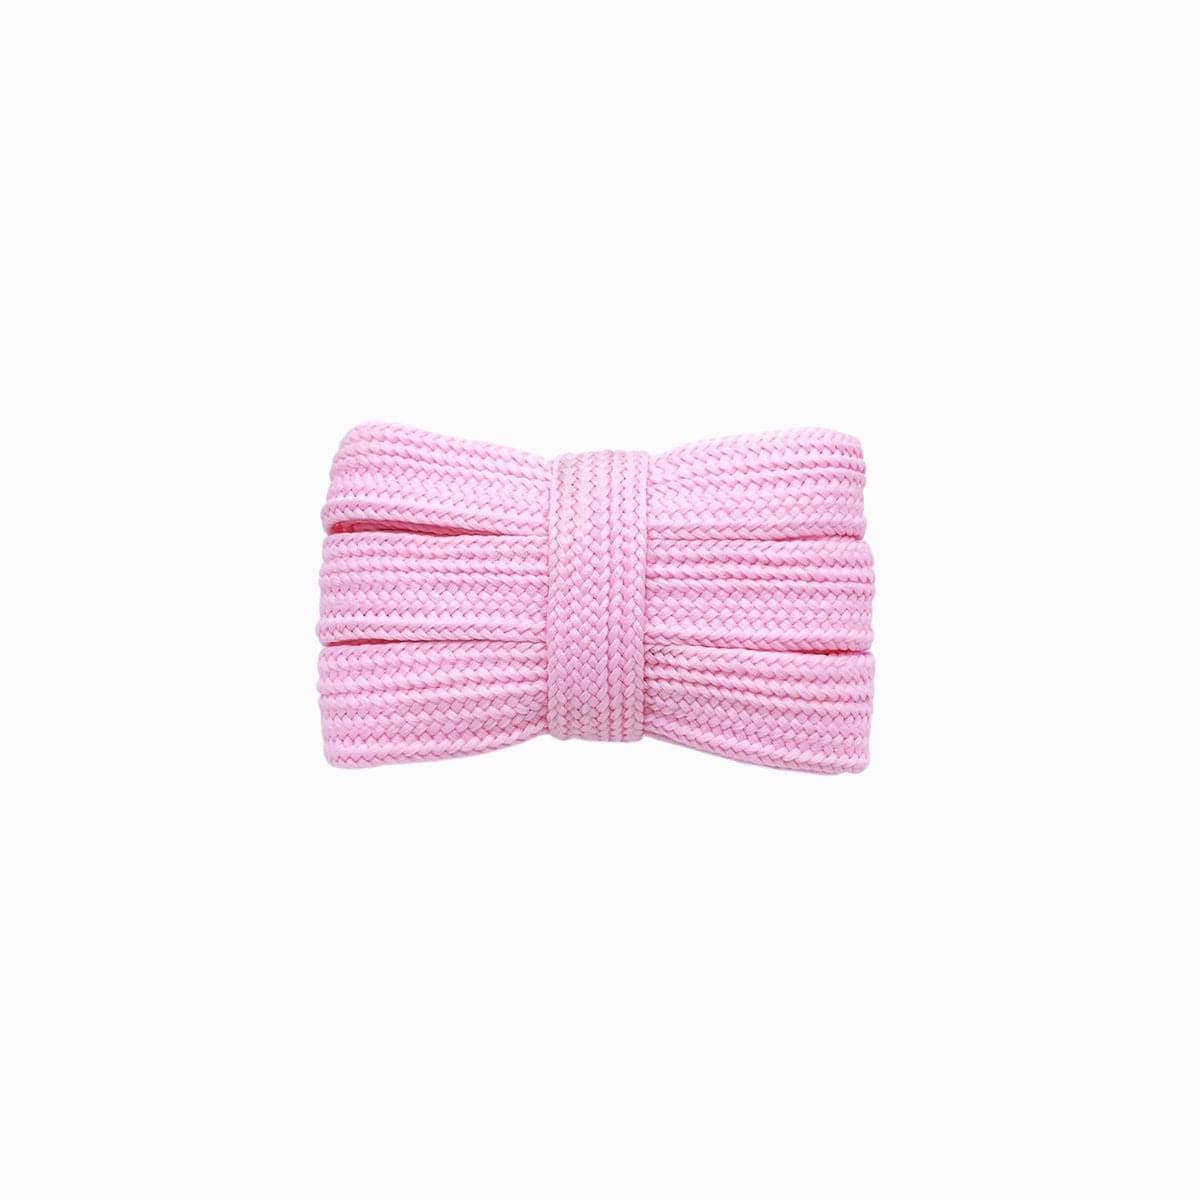 Light Pink Adidas Fat Laces Replacement shoelaces for Adidas Sneakers by Kicks Shoelaces